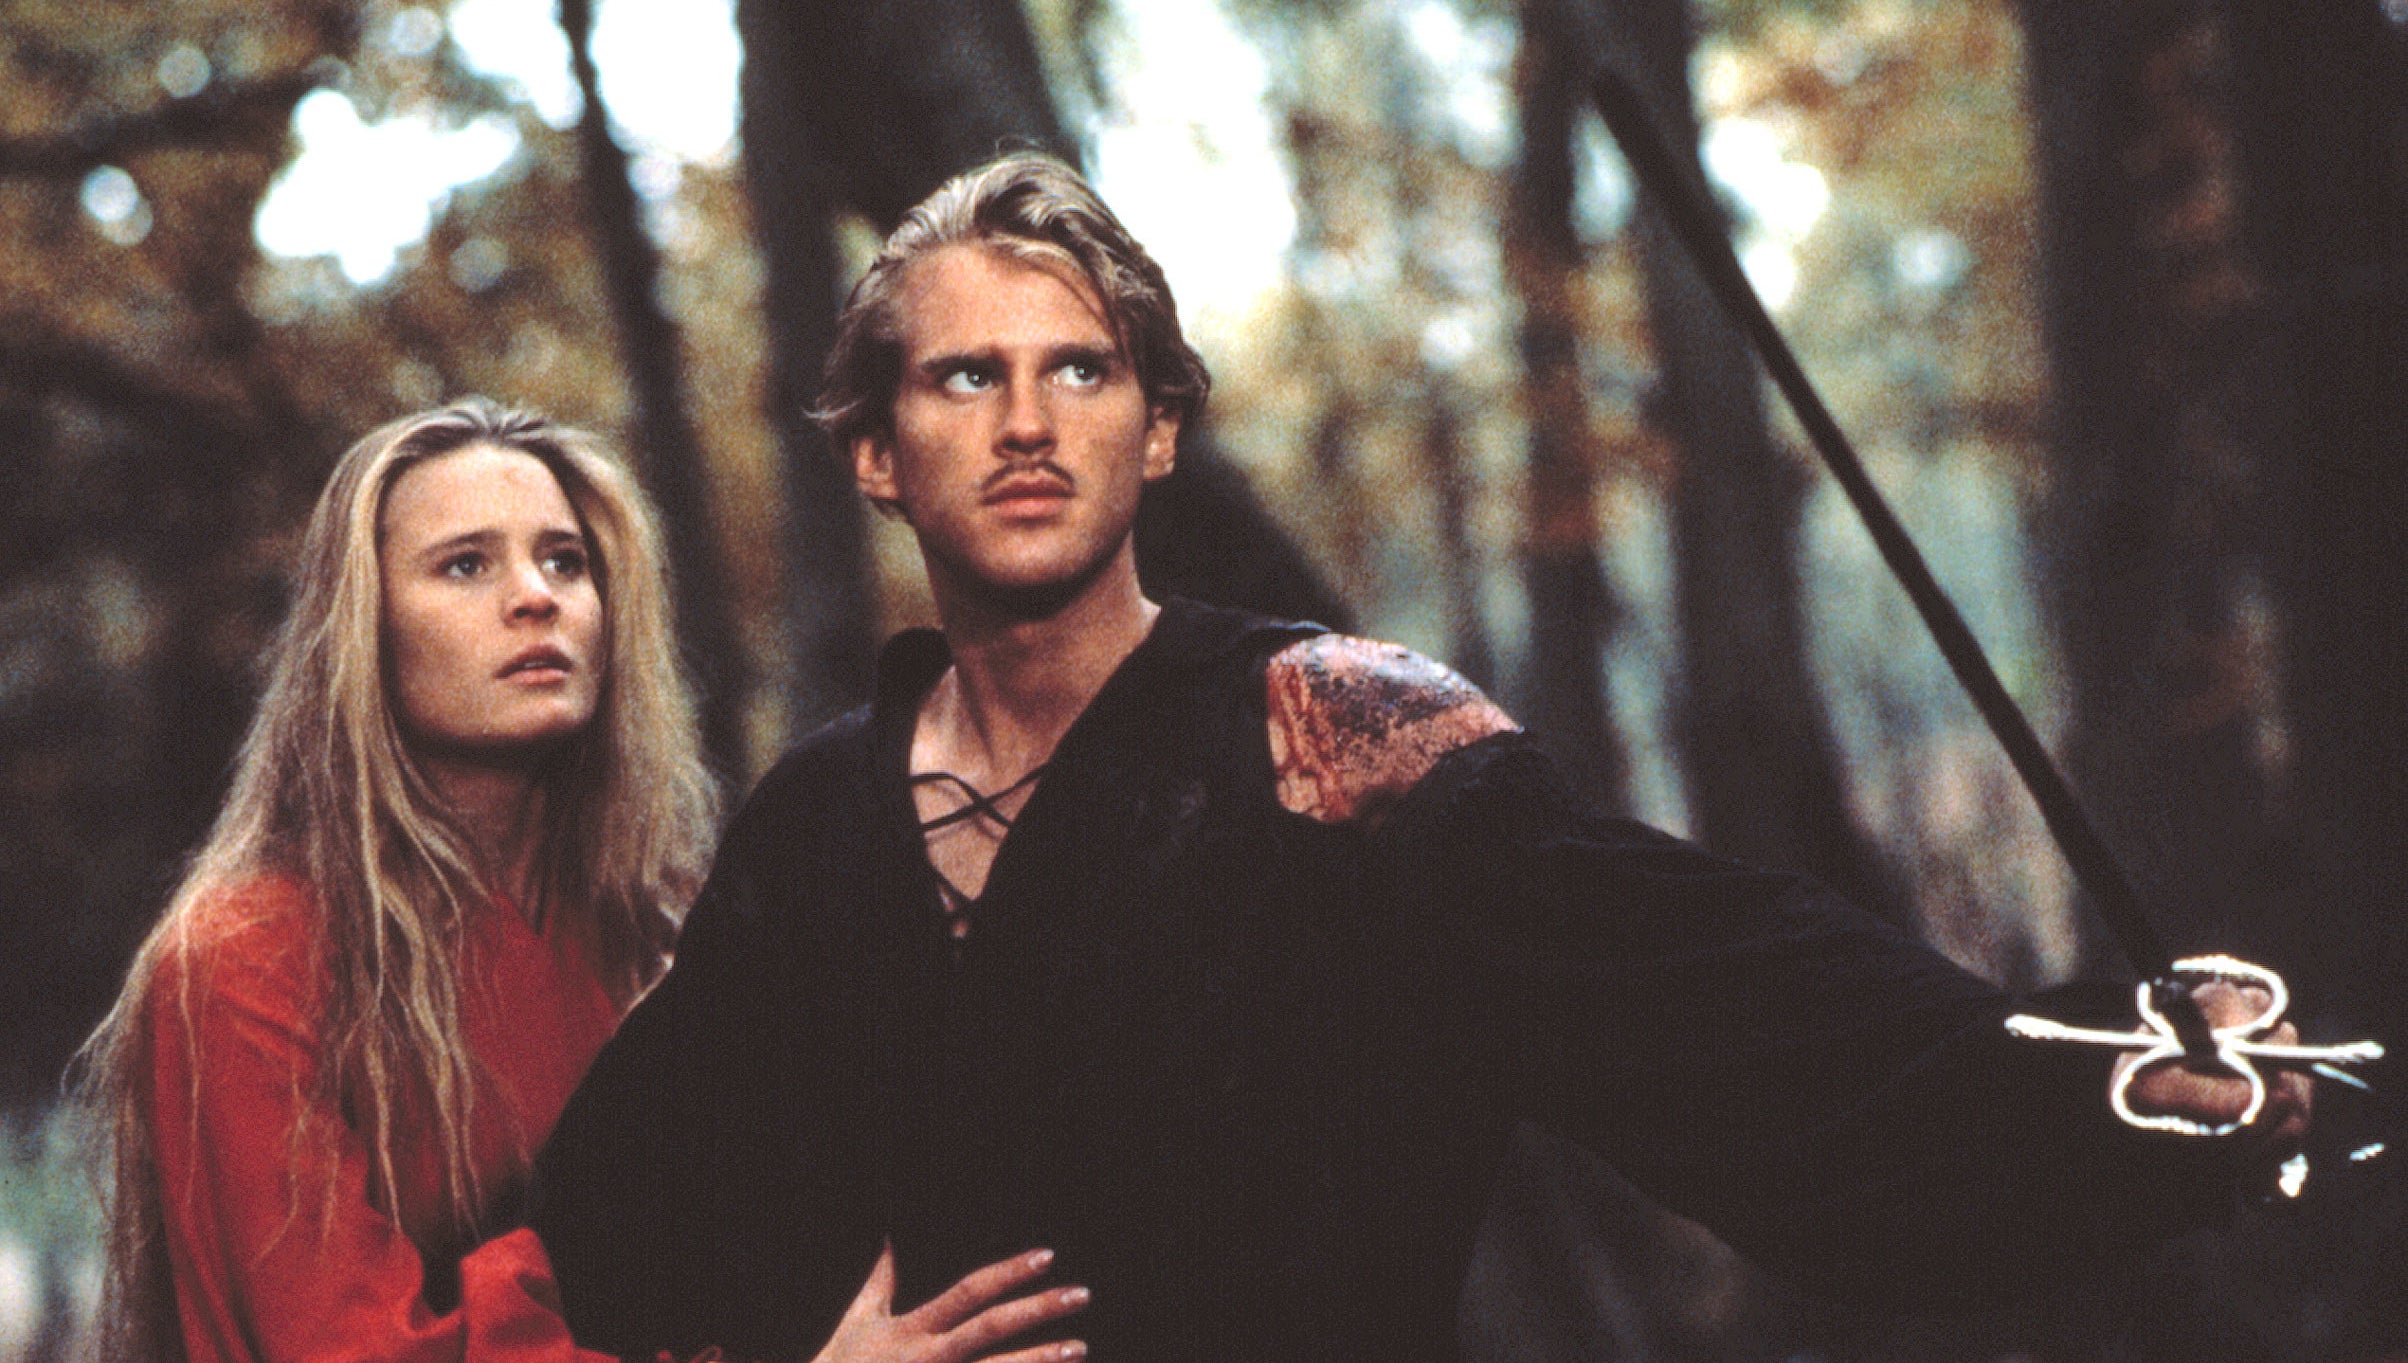 Robin Wright and Cary Elwes in The Princess Bride